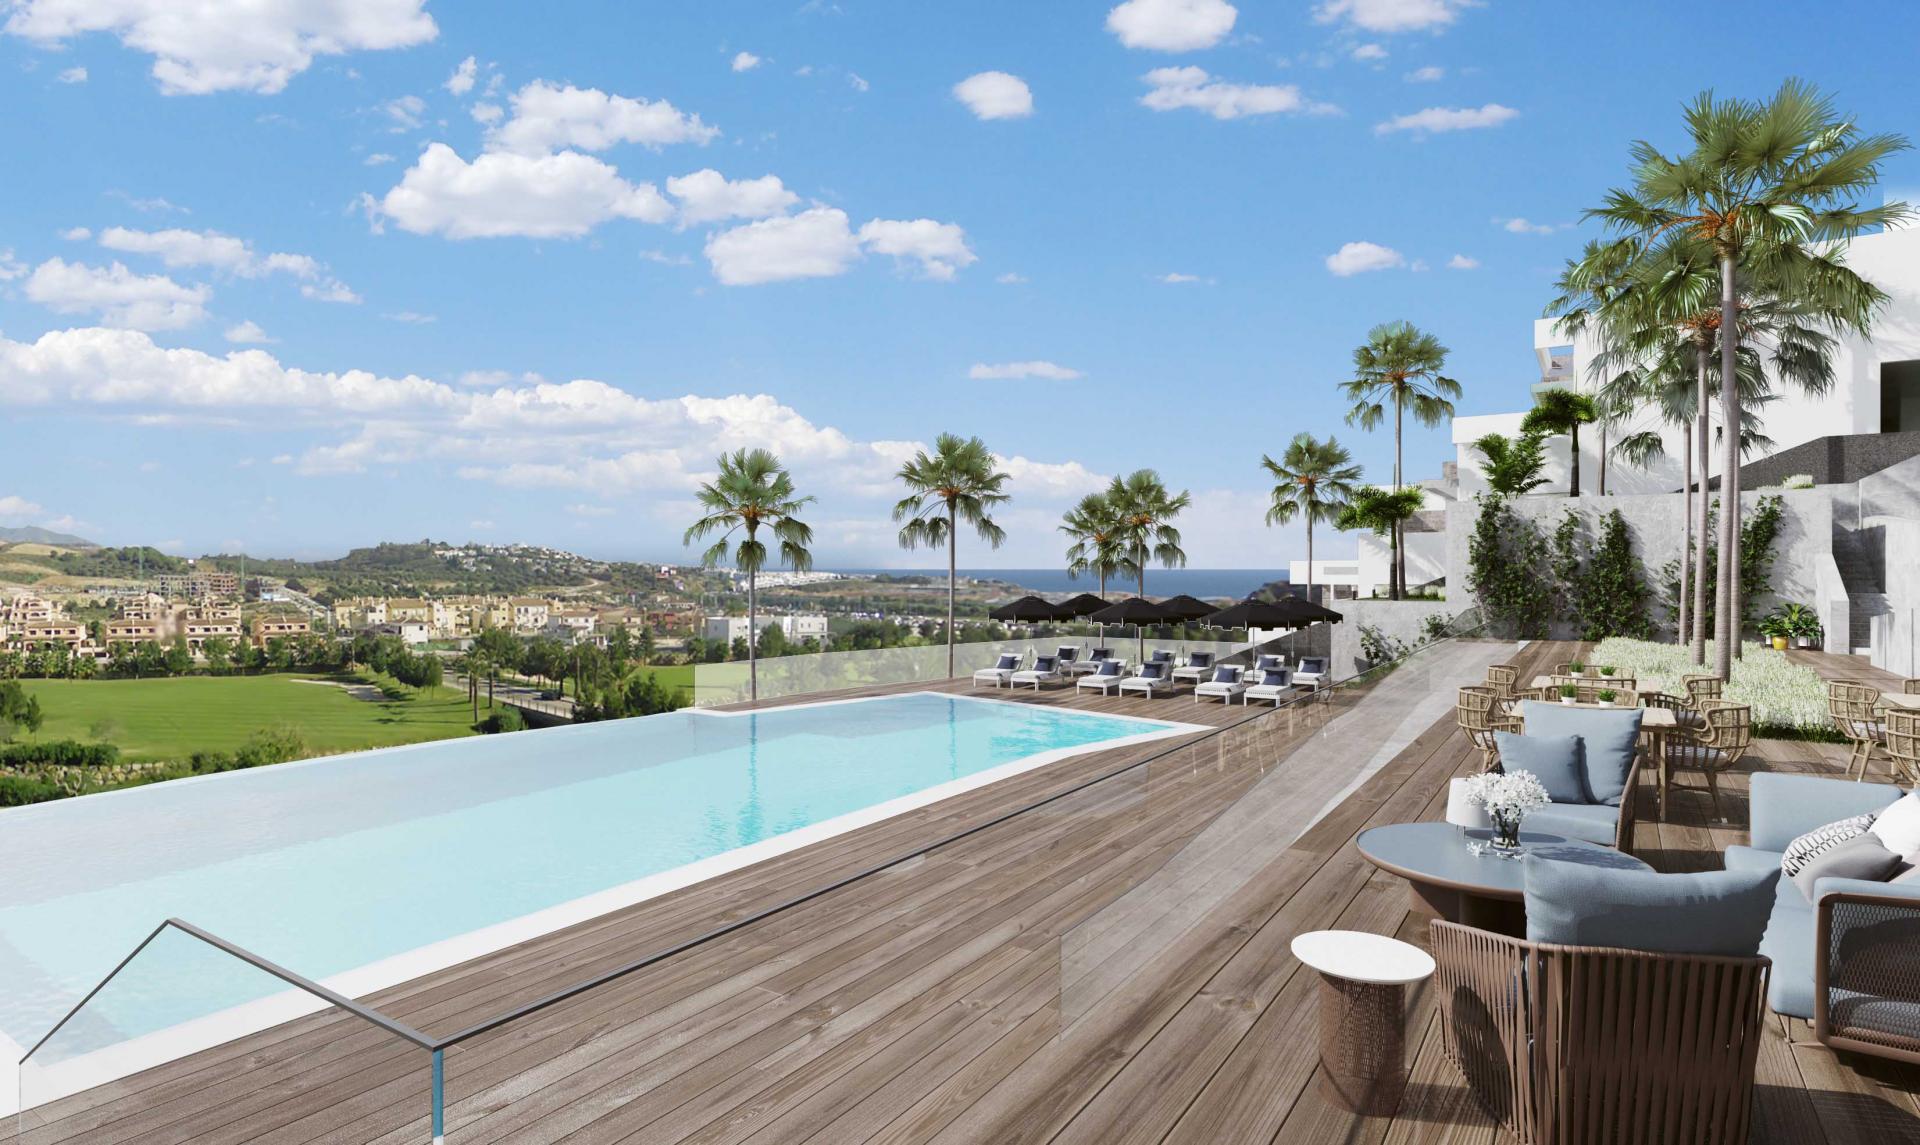 32 apartments within an already consolidated gated golf complex. Probably thebest position in La Cala de Mijas. Excellent communal areas and all amenities,shops, bars and restaurant of Cala de Mijas in walking distance. Tranquility desire ...